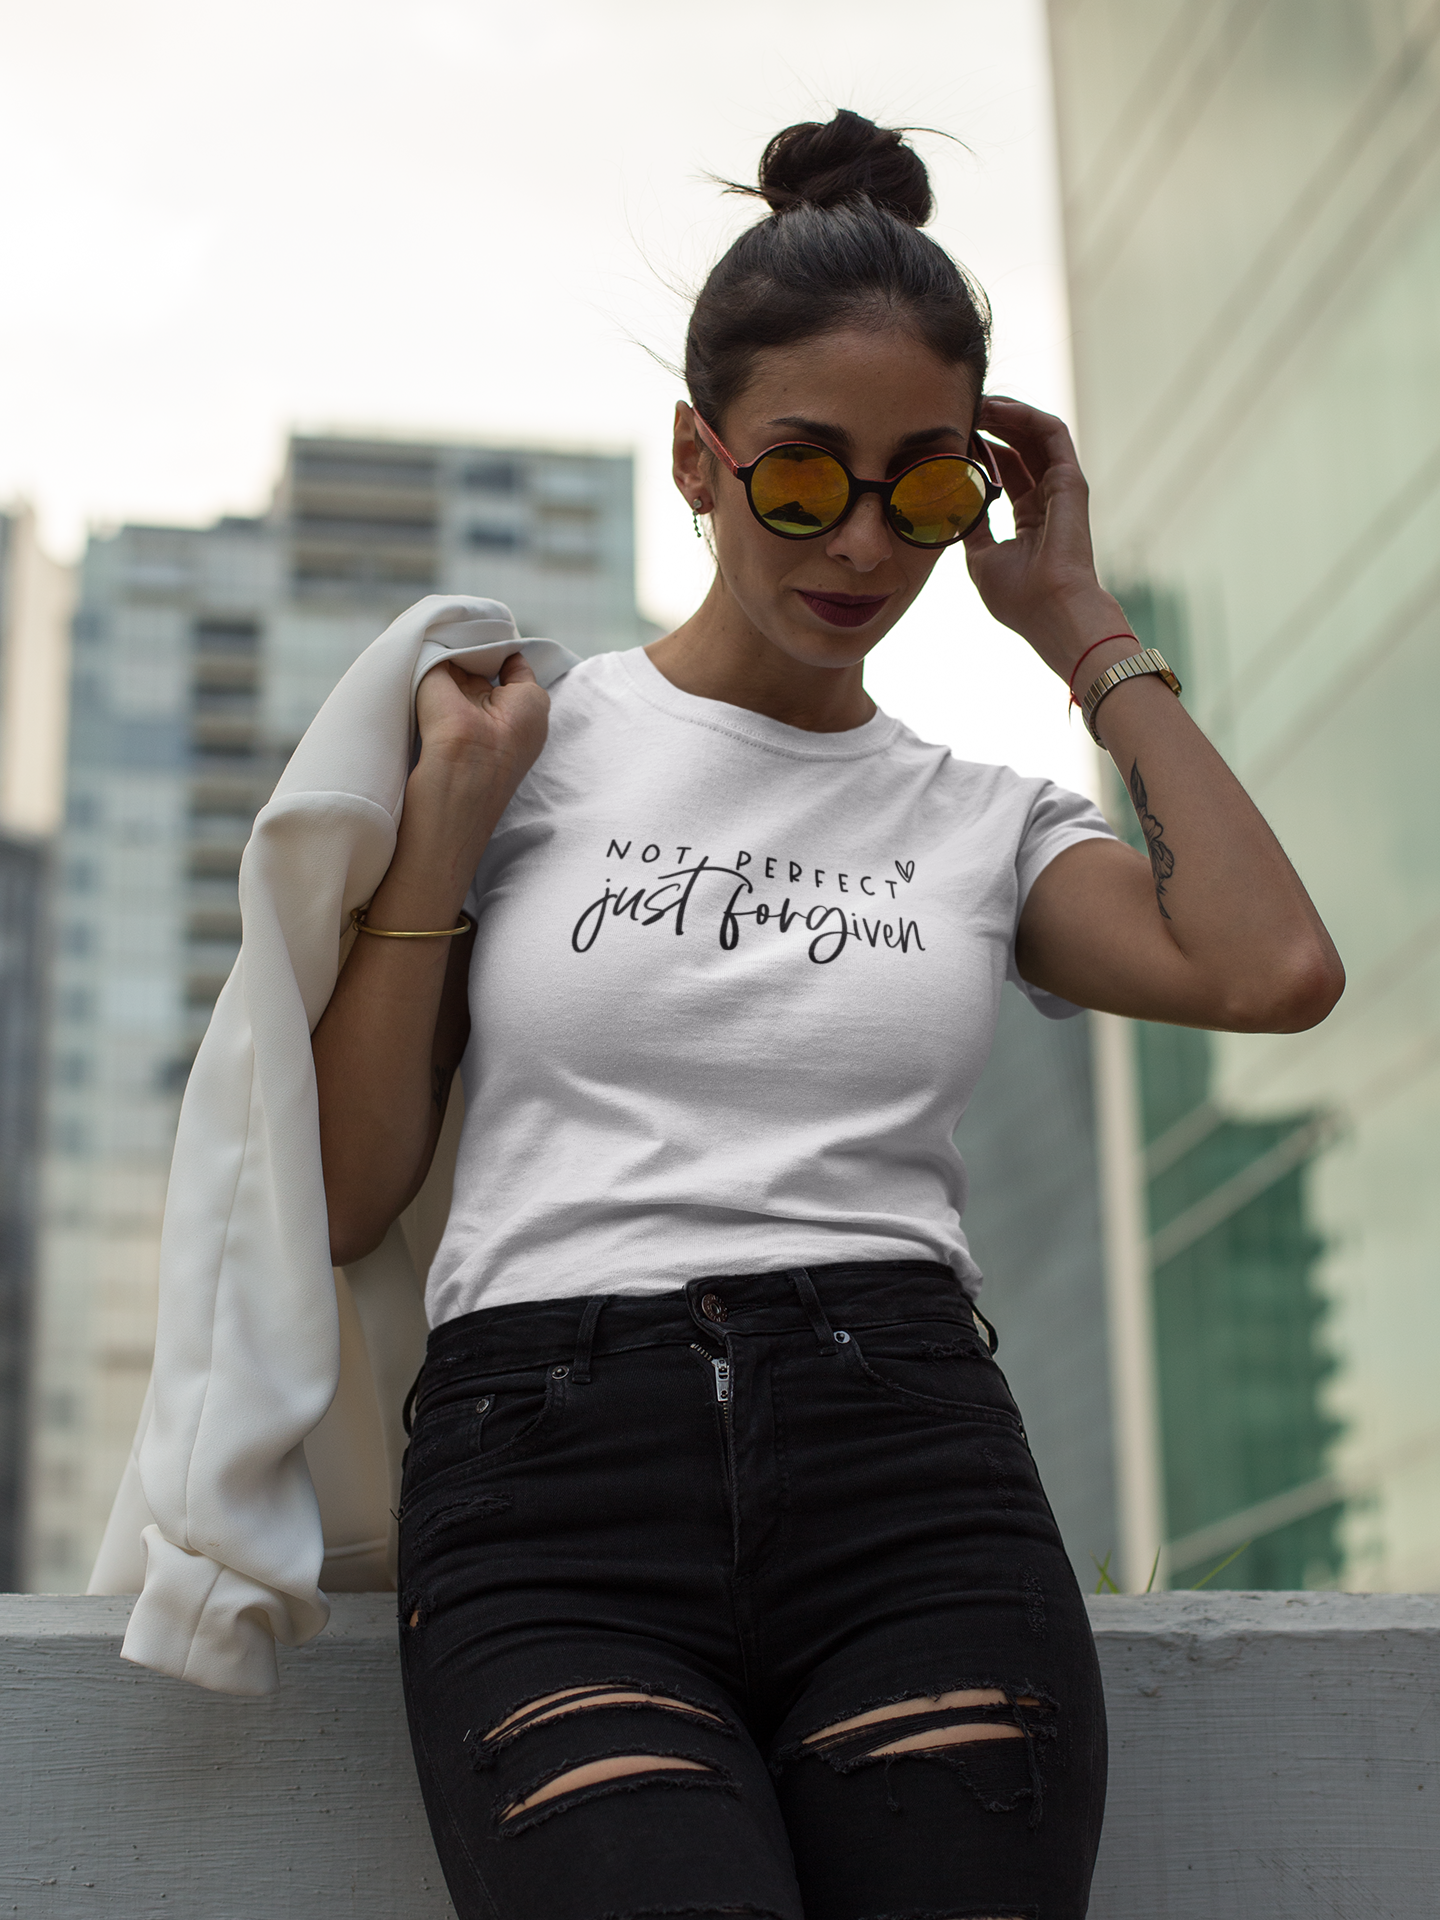 Not Perfect Just Forgiven Short-Sleeve Unisex T-Shirt - DRESS FOR THE KING